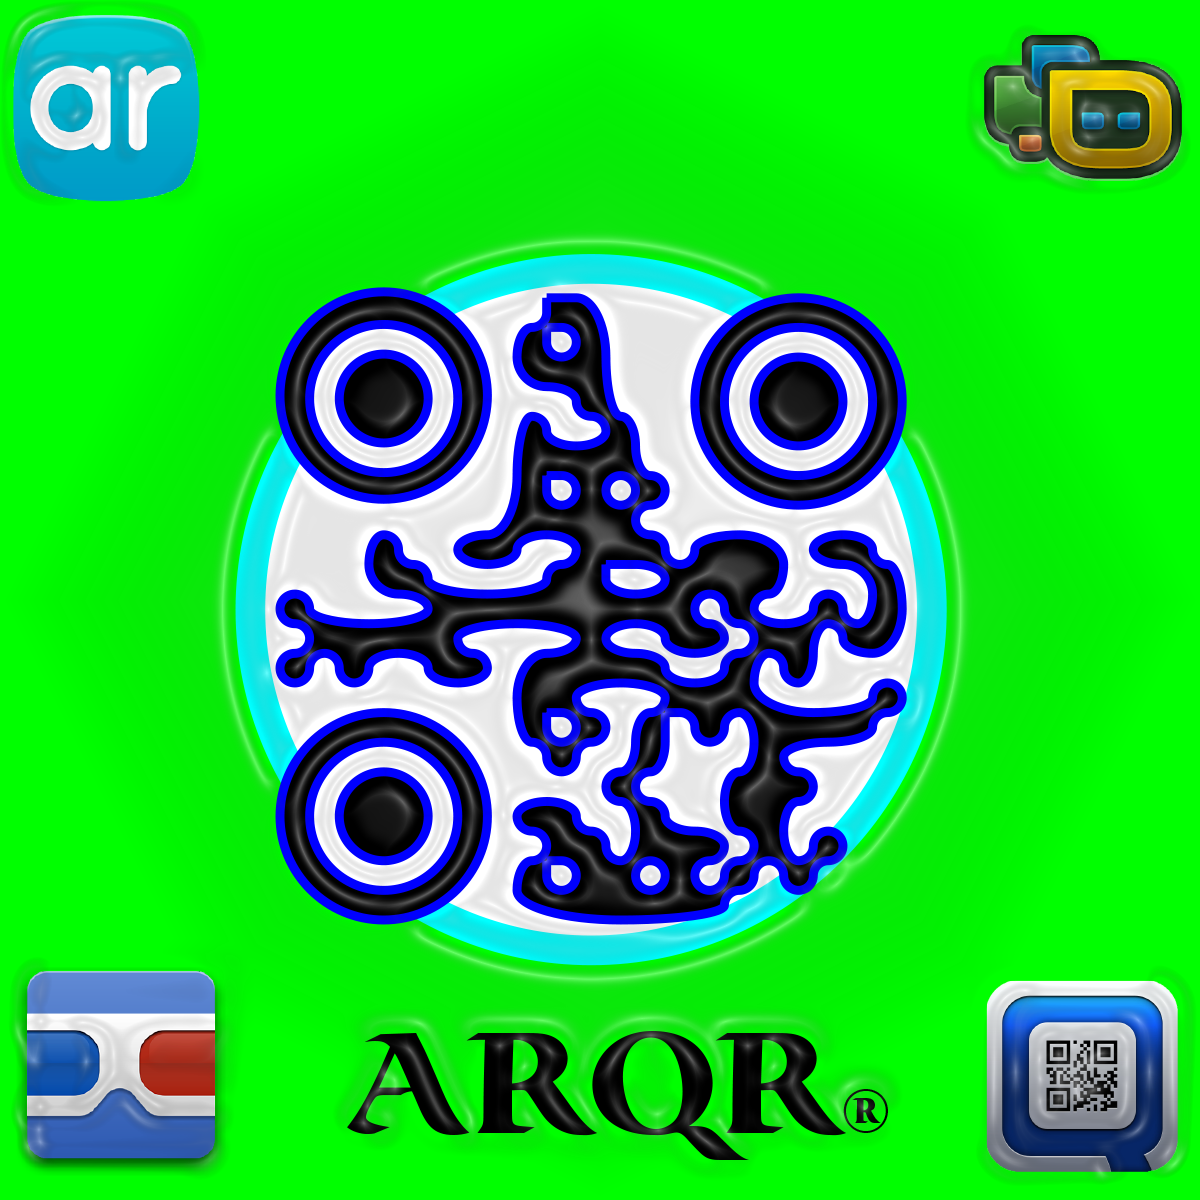 ARQR Code for the YouTube video That Power by will.i.am and Justin Bieber